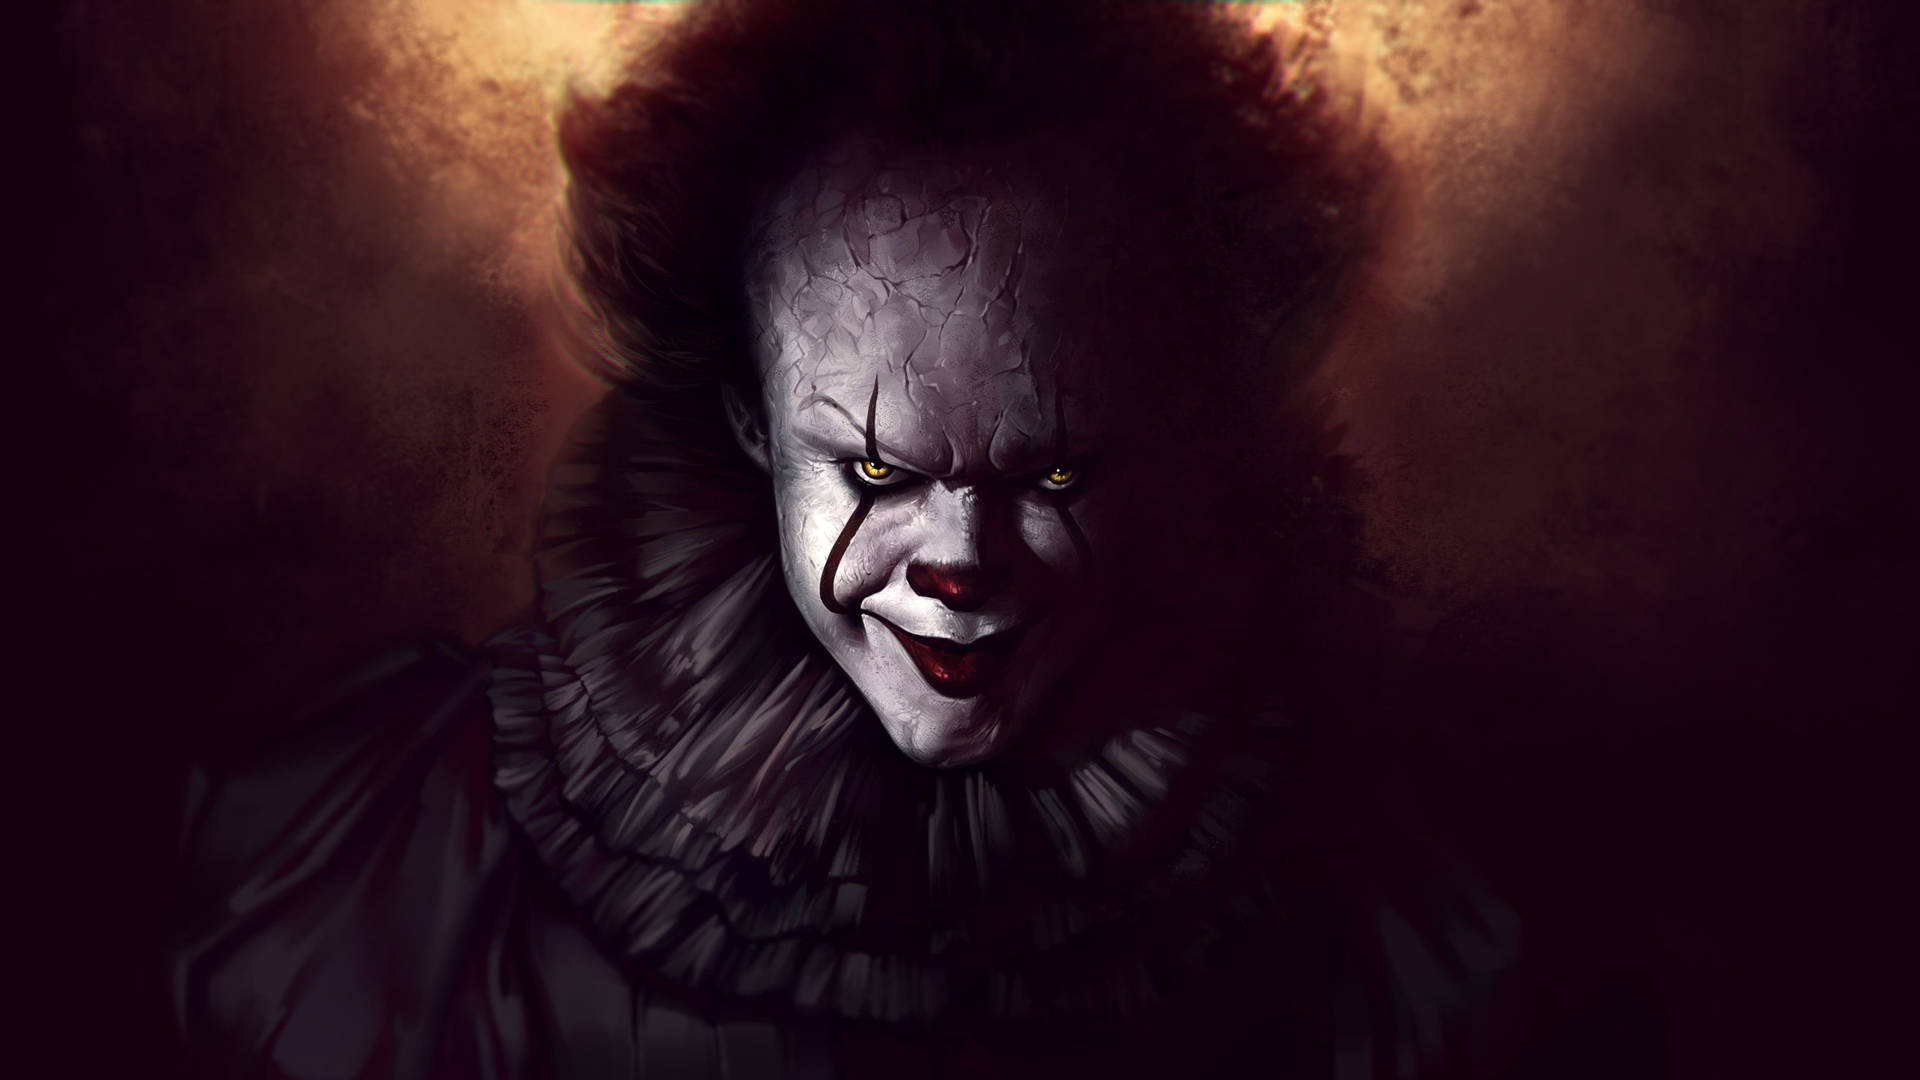 "Clown Around with Pennywise" Wallpaper